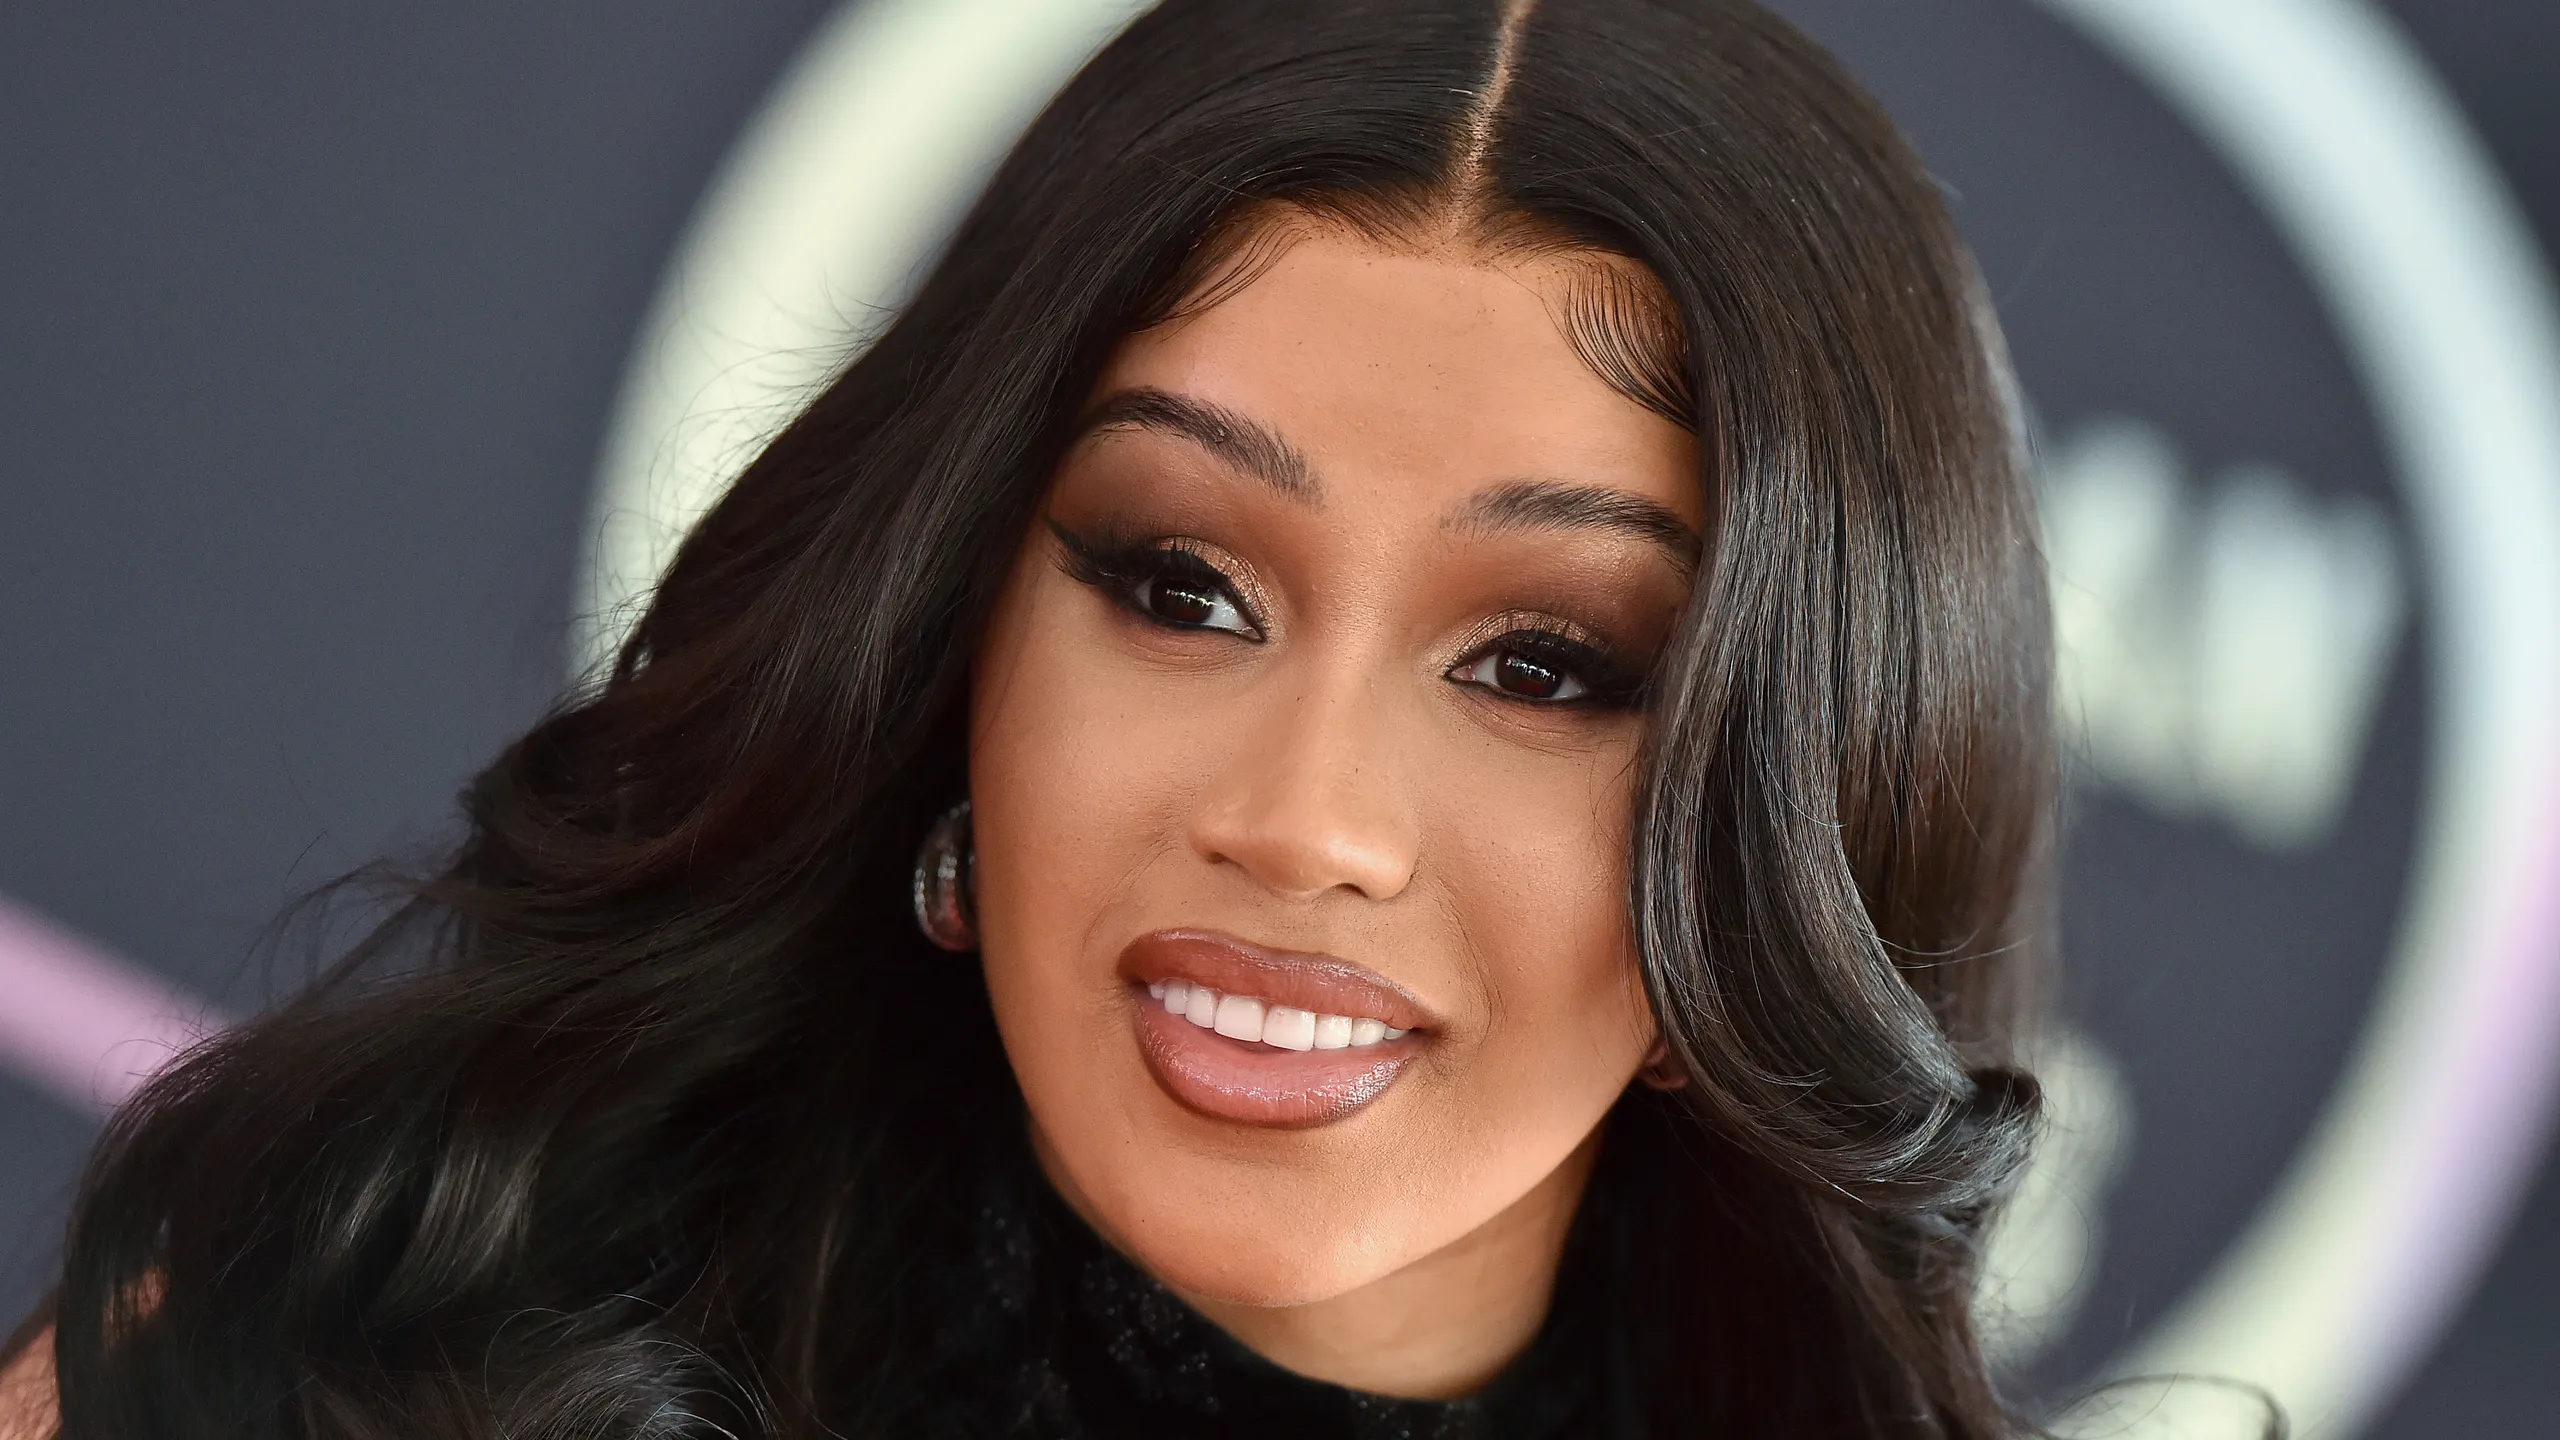 Female Security Guard Accuses Cardi B of Using Her ‘Long Fingernails’ to Scratch Her Face During Alleged 2018 Assault